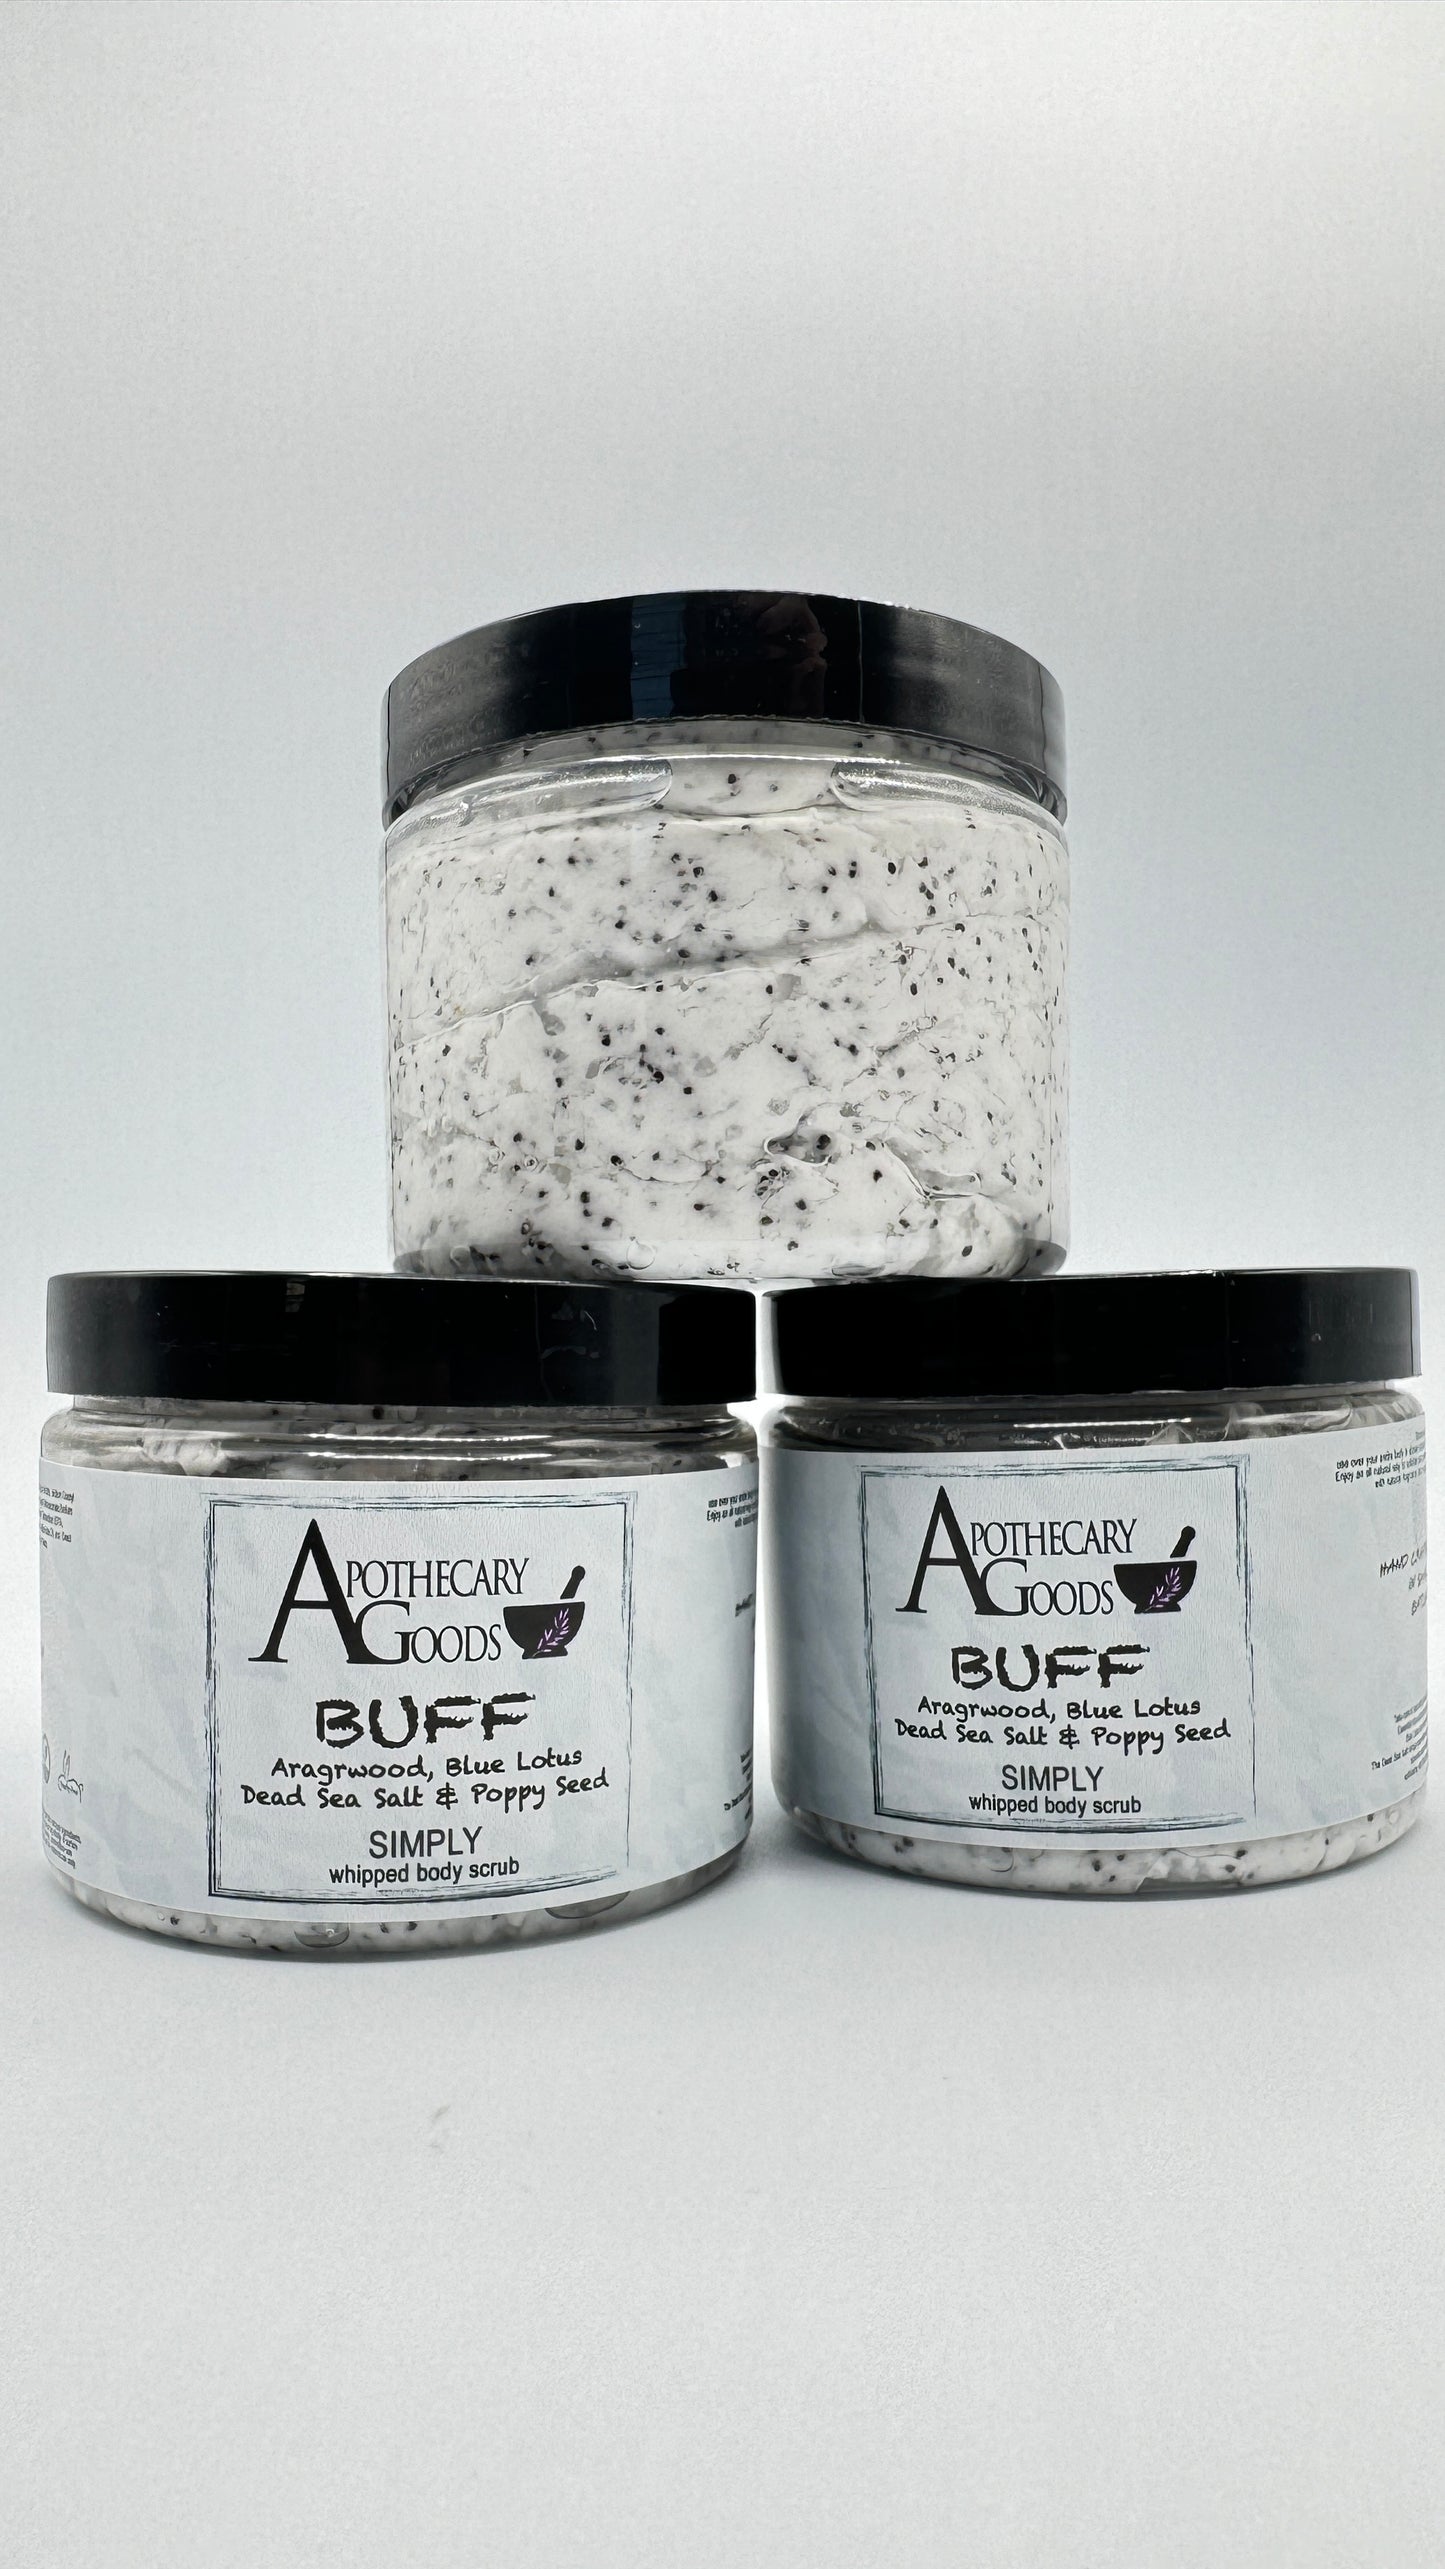 BUFF Whipped Dead Sea Salt and Poppy Seed Body Scrub – SIMPLY Collection by Apothecary Goods